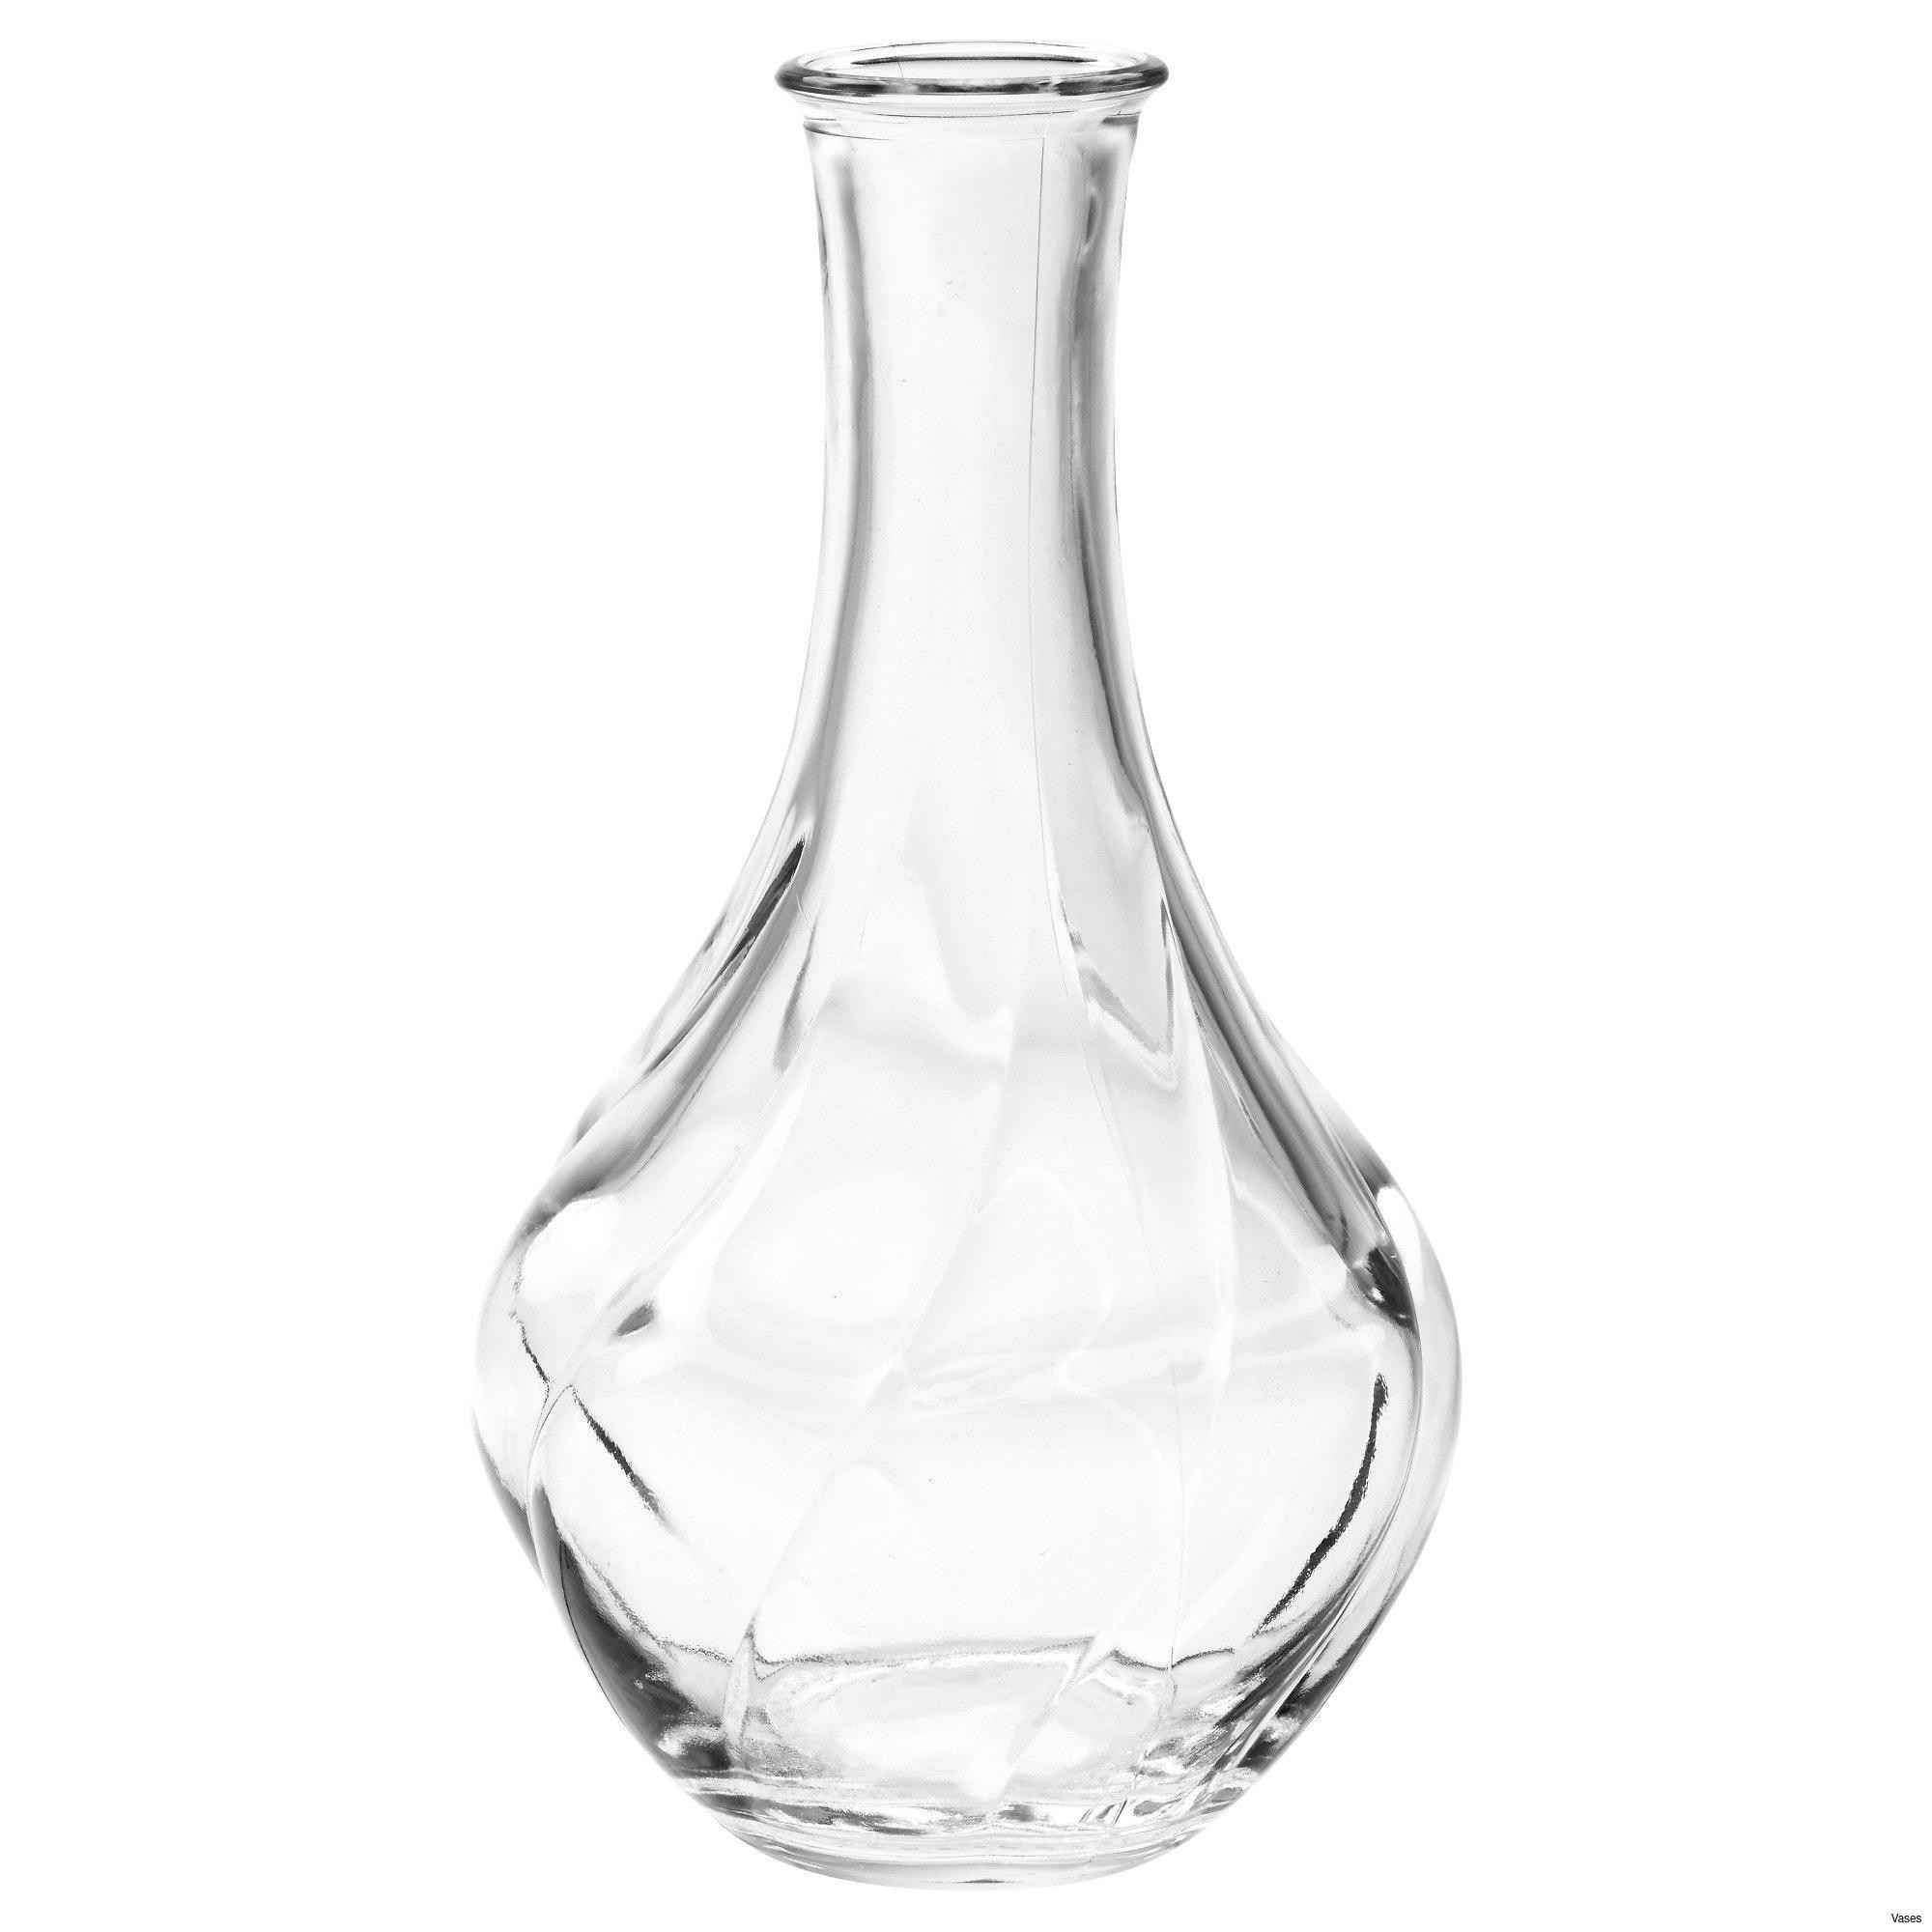 28 Trendy Discount Clear Vases 2024 free download discount clear vases of large glass vase gallery living room glass vases fresh clear vase 0d with regard to large glass vase gallery living room glass vases fresh clear vase 0d tags amazing 